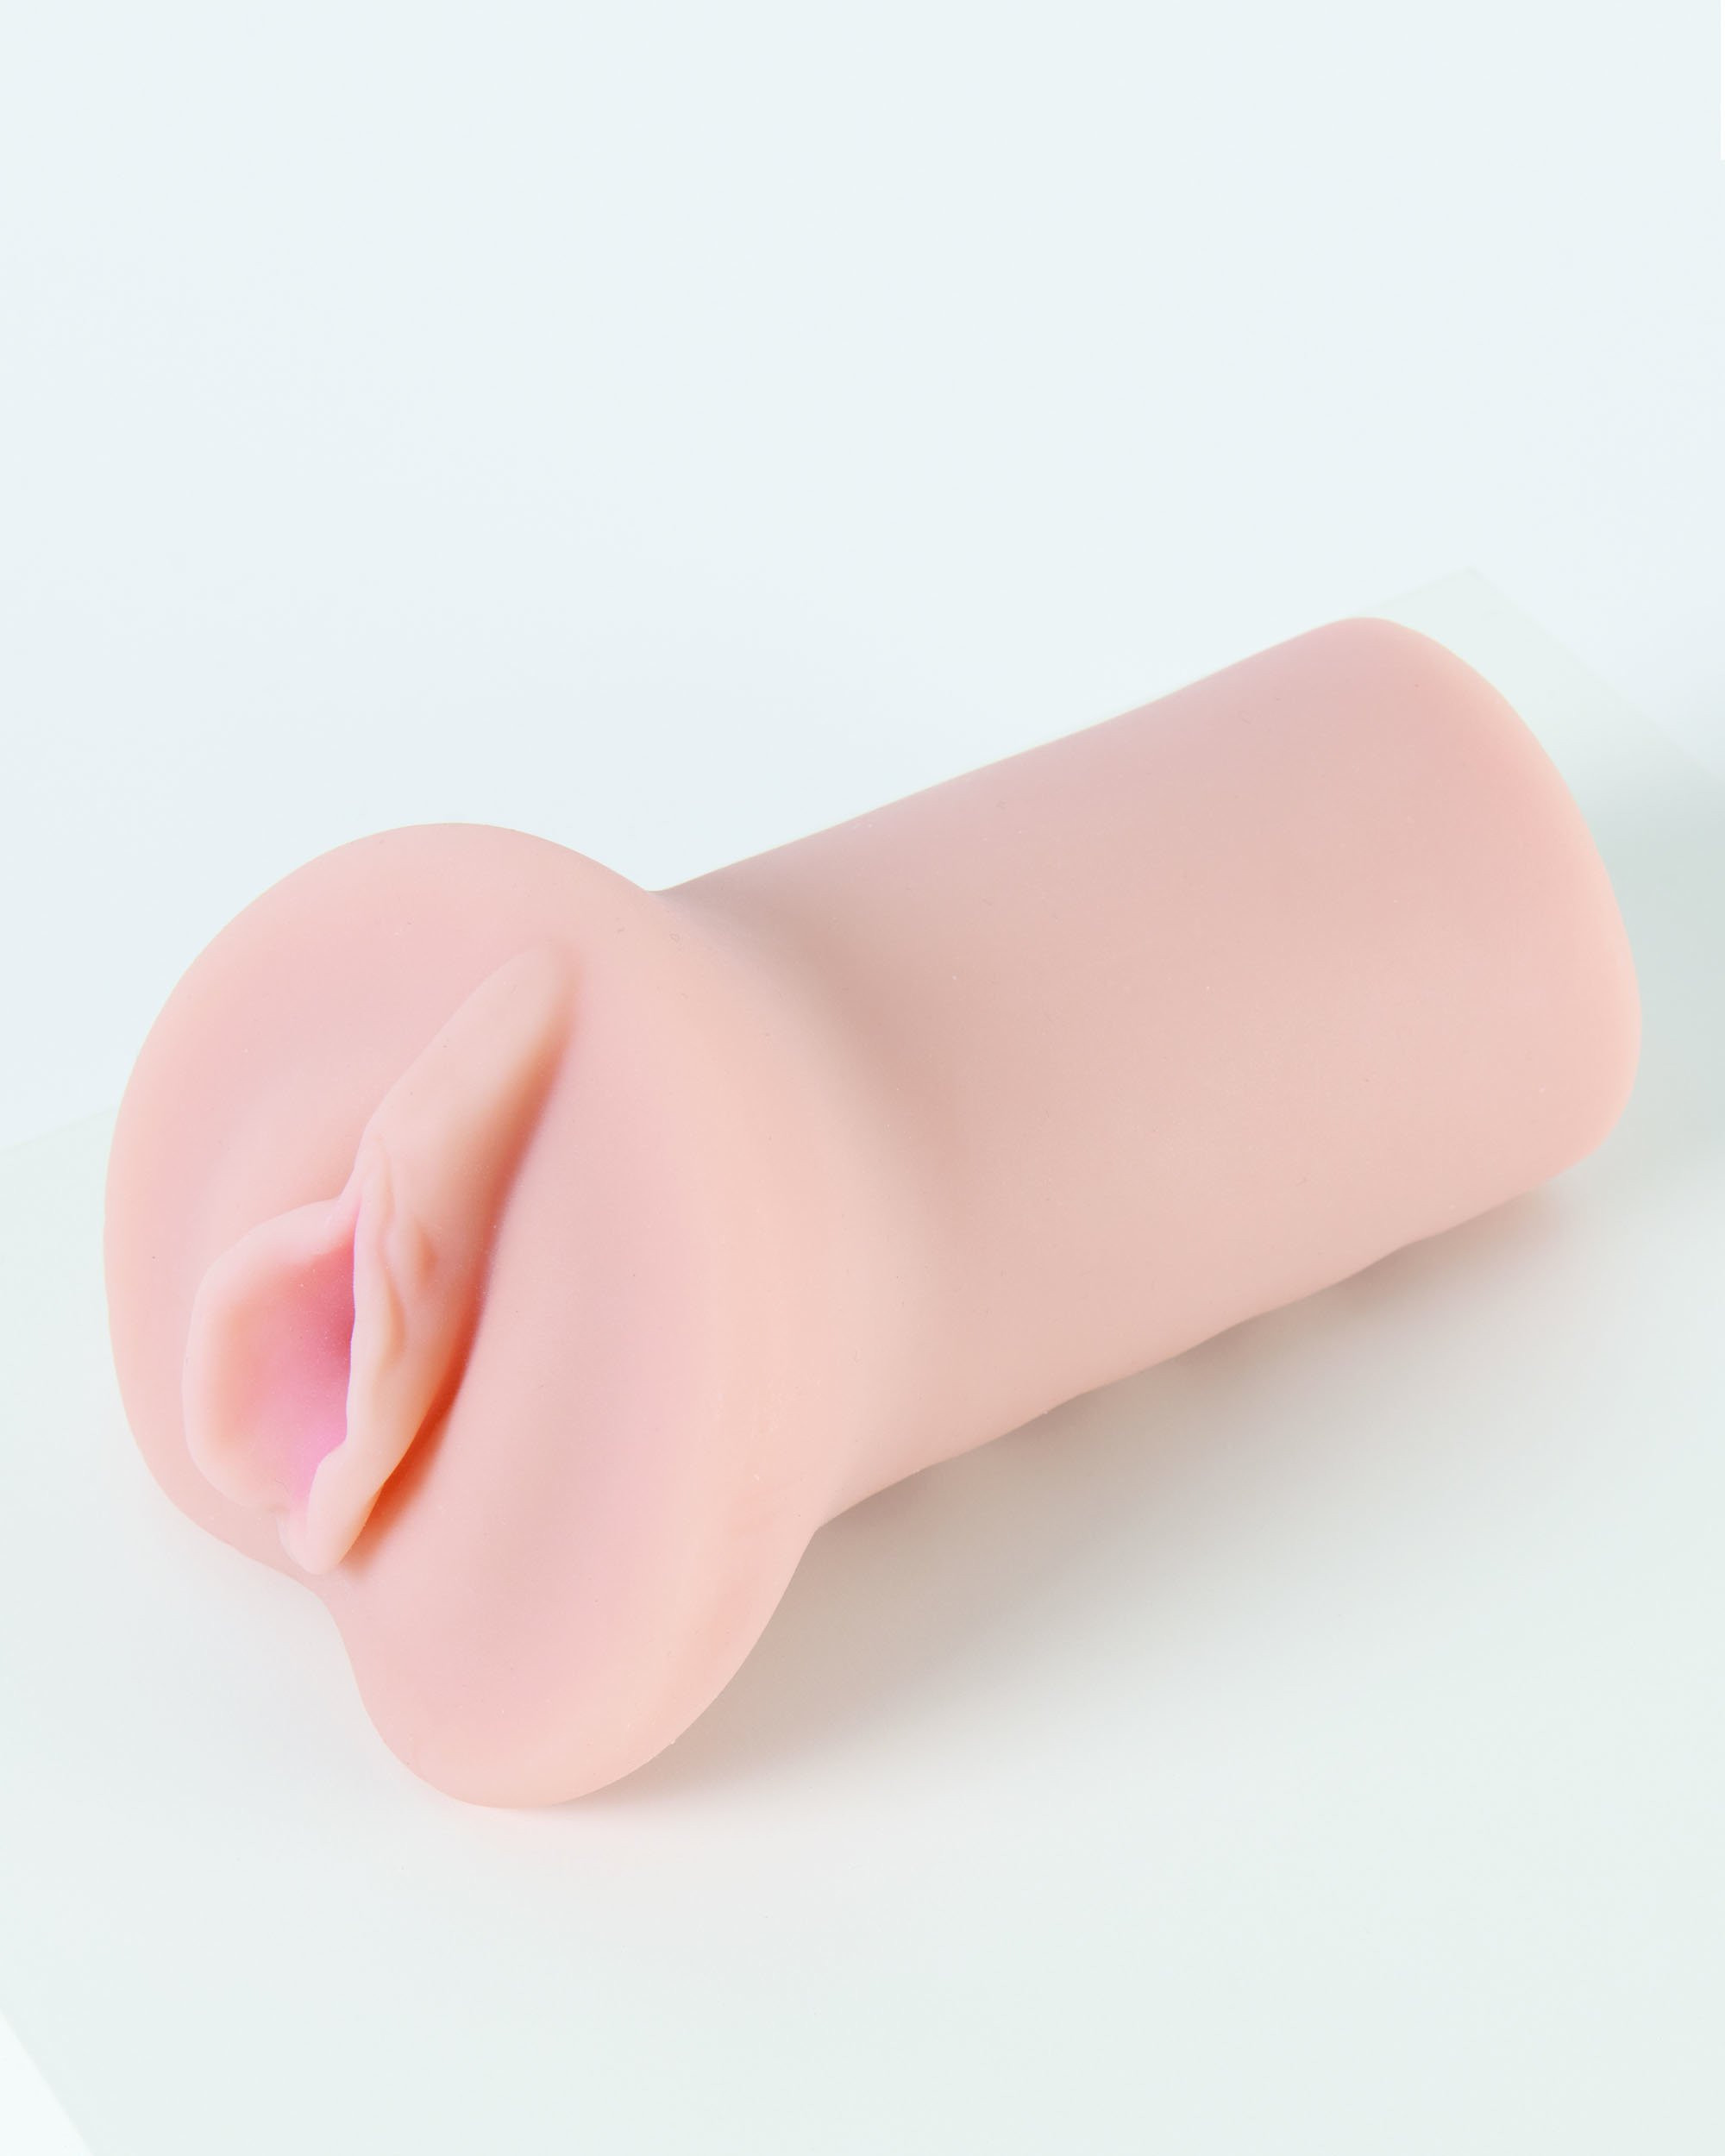 The Super Sensations Bumps Pussy Stroker is designed to thrill. This super soft, real feel masturbator features a fully textured tunnel with bumps for unrivaled sensations with every stroke. Want more? Slot a bullet vibrator into the smaller hole for m #sex